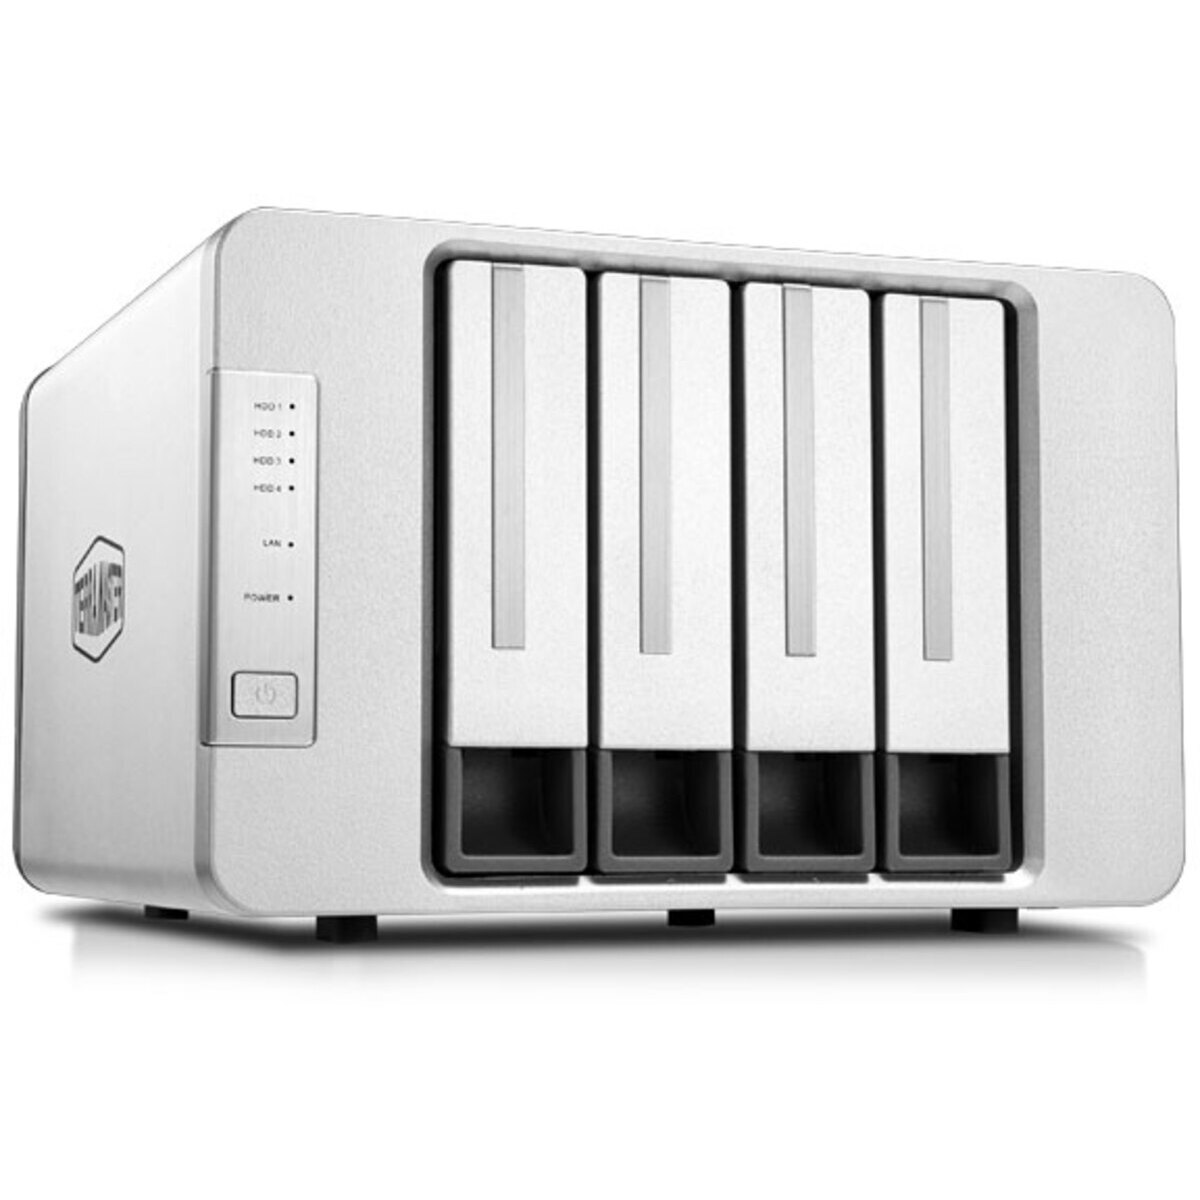 TerraMaster F4-223 16tb 4-Bay Desktop Personal / Basic Home / Small Office NAS - Network Attached Storage Device 4x4tb Sandisk Ultra 3D SDSSDH3-4T00 2.5 560/520MB/s SATA 6Gb/s SSD CONSUMER Class Drives Installed - Burn-In Tested - FREE RAM UPGRADE F4-223